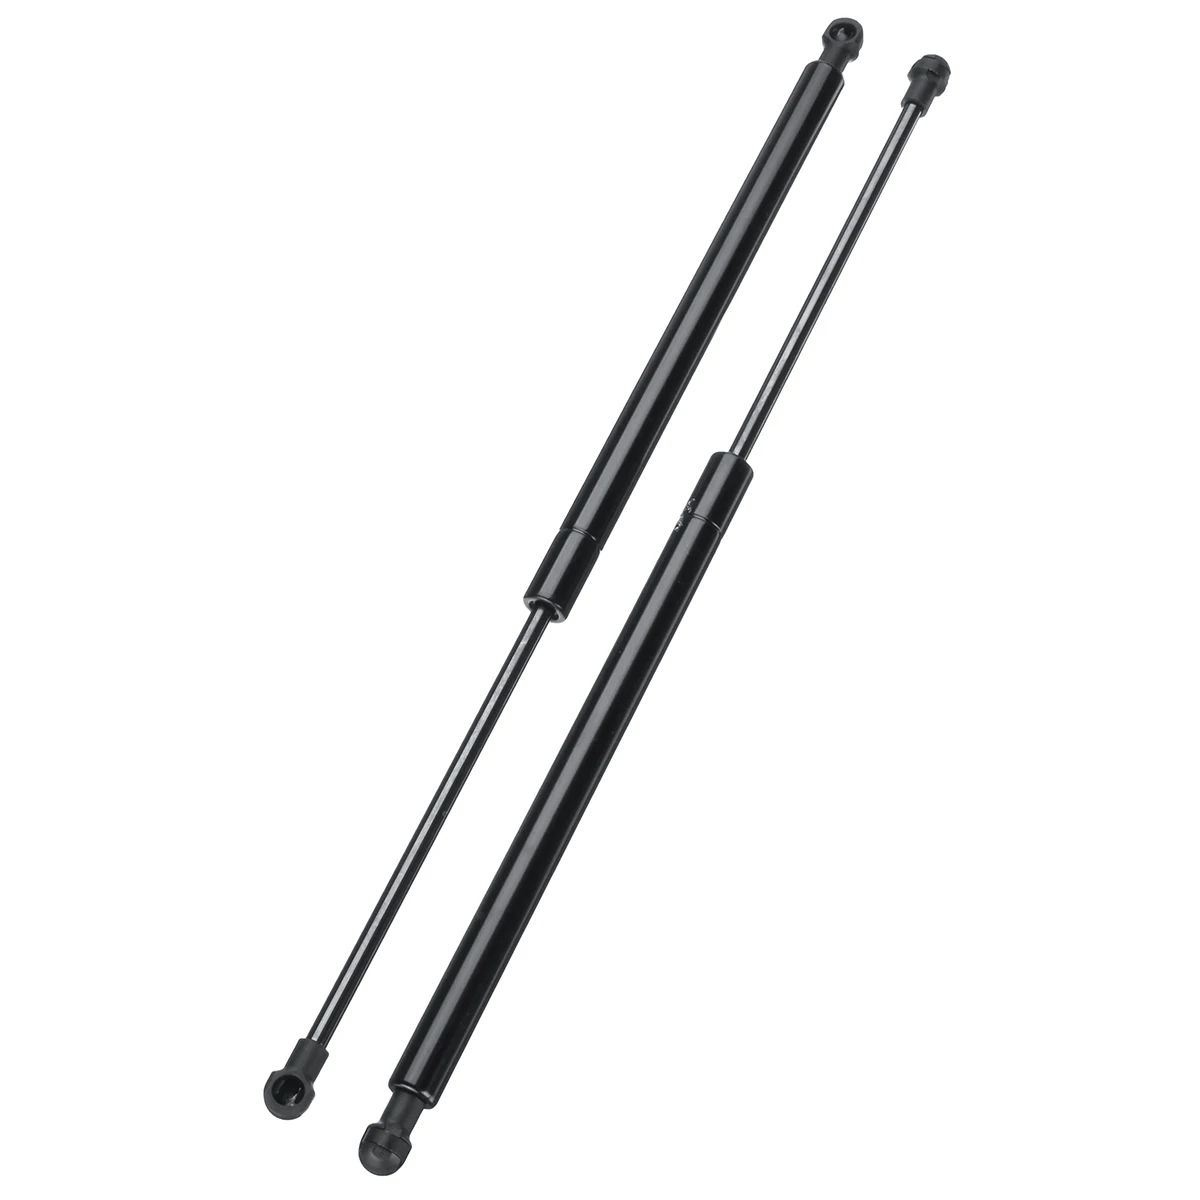 

2pcs Rear Tailgate Truck Gas Struts Support BHE780060 For Land Rover Discovery 3 4 2004 2005 2006 2007 2008 2009 2010 - 2013